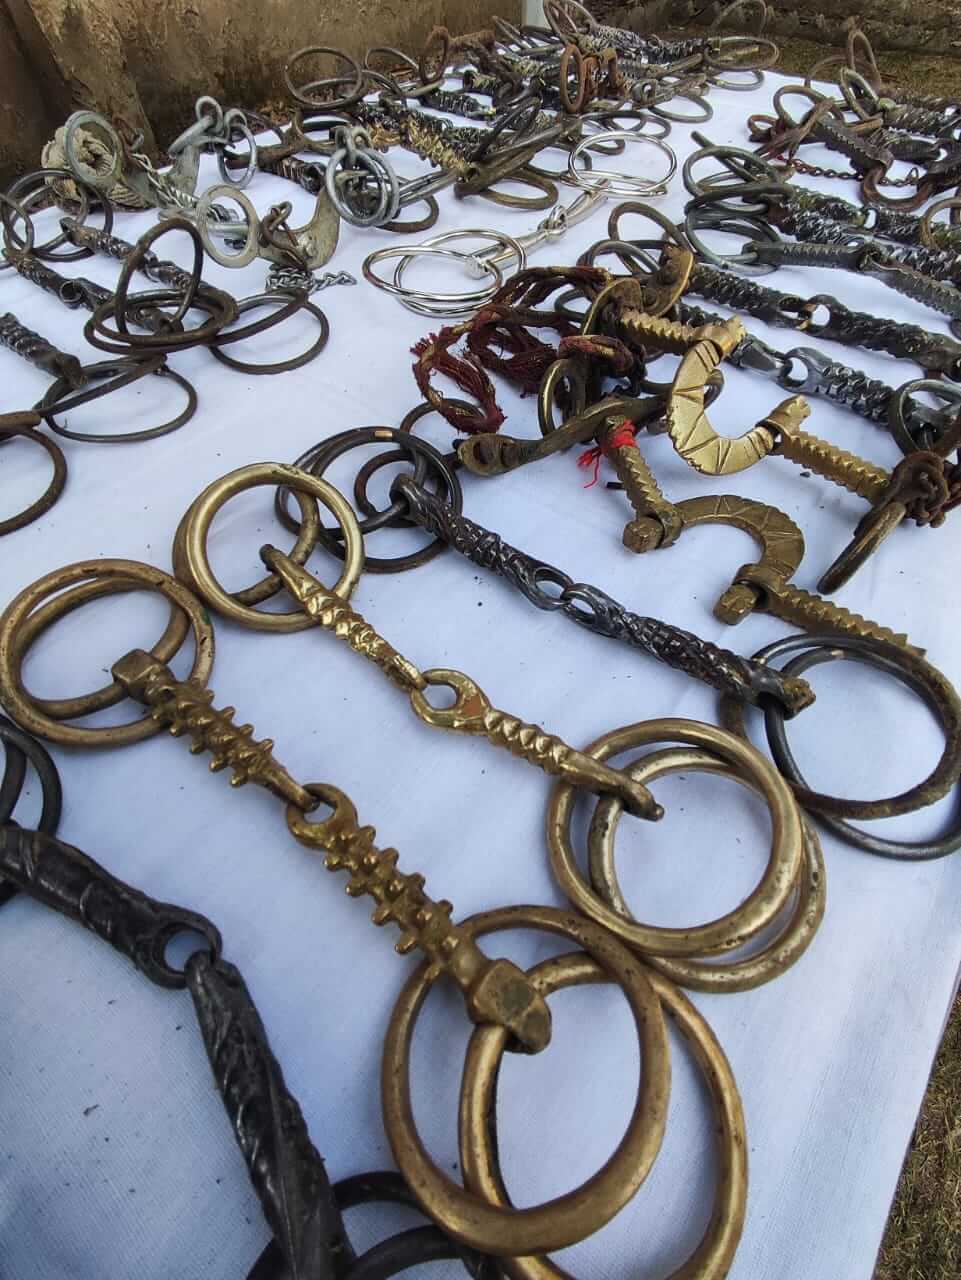 Chandigarh Police and PETA India Displays 200 Seized Spiked Bits Used to  Control Horses in Weddings - Blog - PETA India